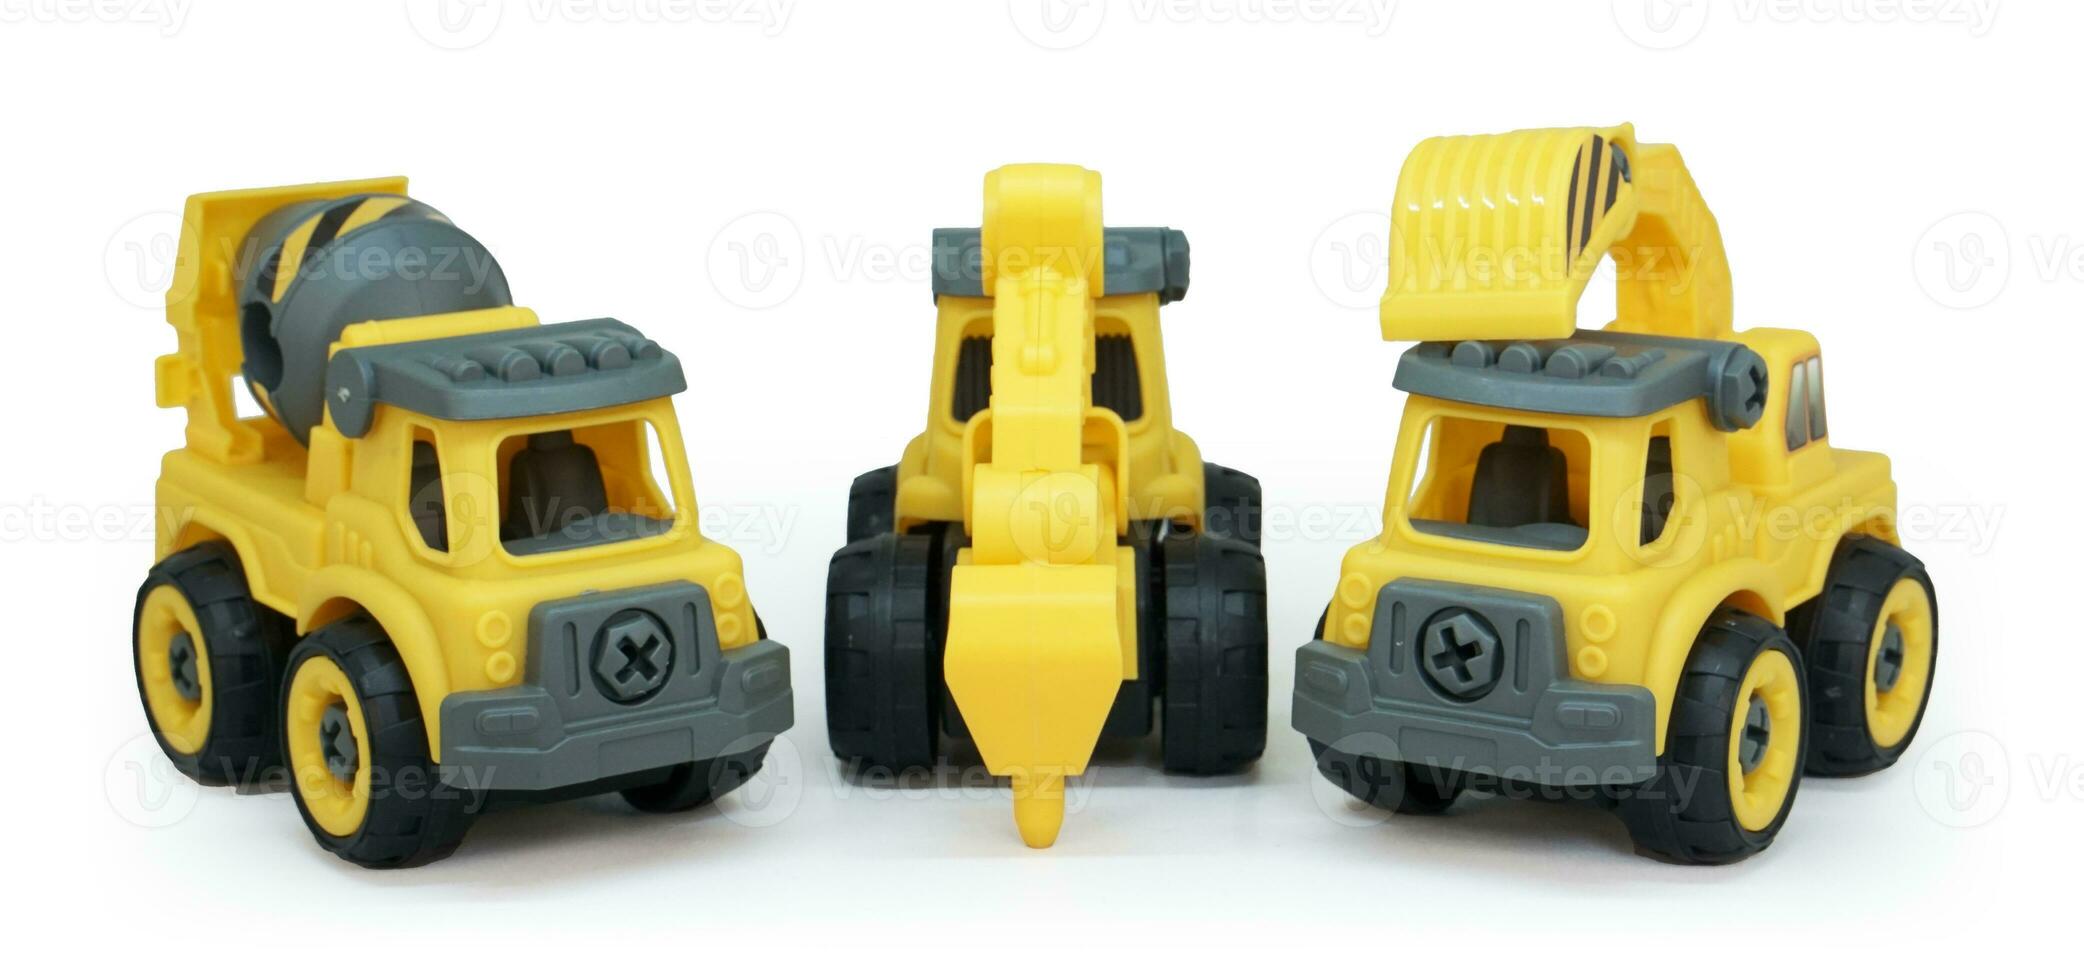 yellow plastic toy of concrete mixer, tractor drill and excavator truck line up isolated on white background. heavy construction vehicle. photo